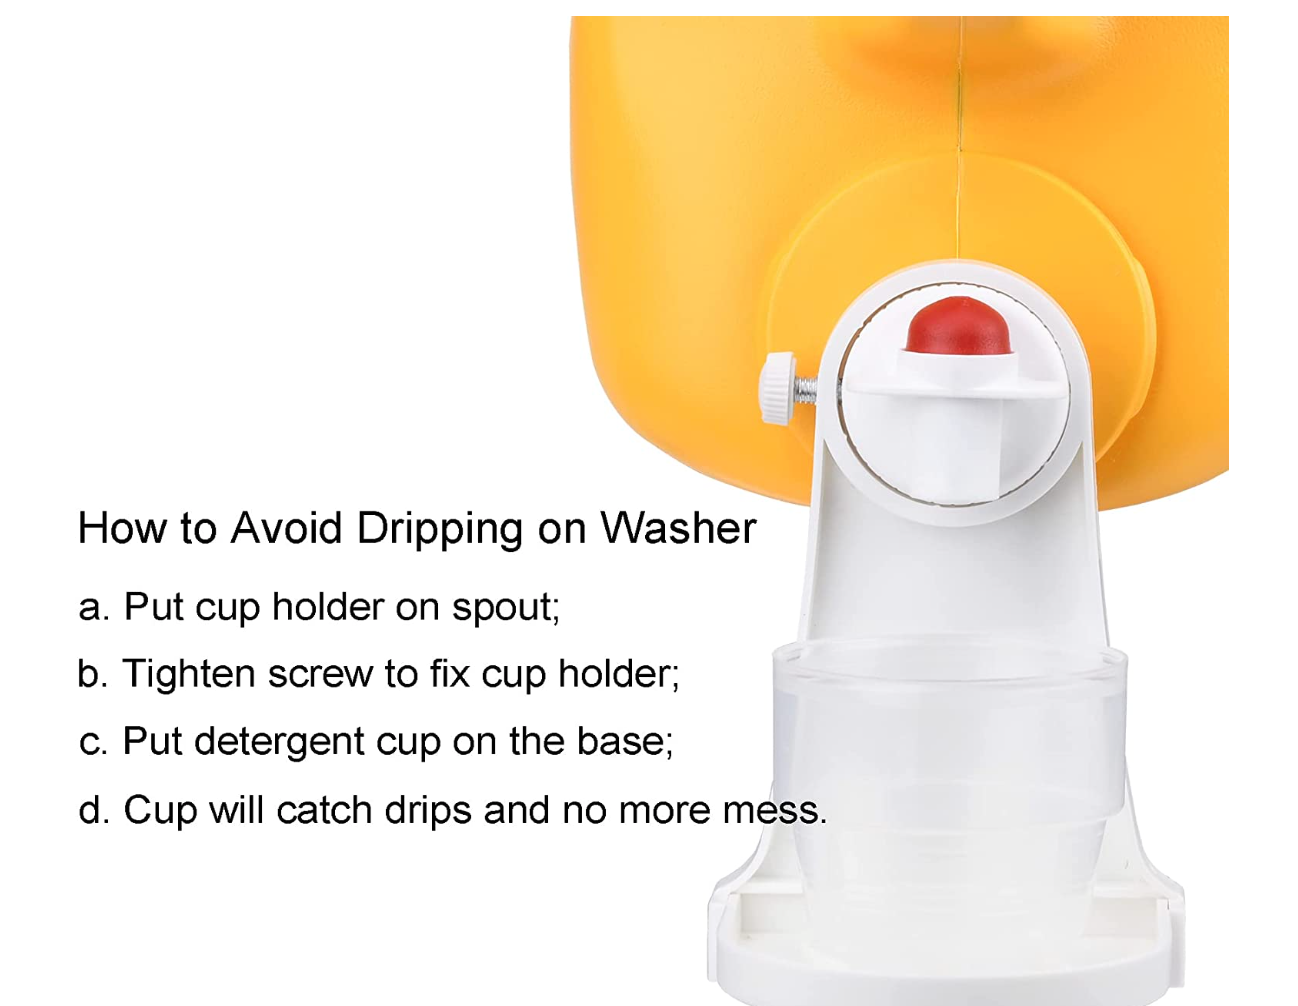 Apparently, you're supposed to put the laundry detergent cup right in the  washer